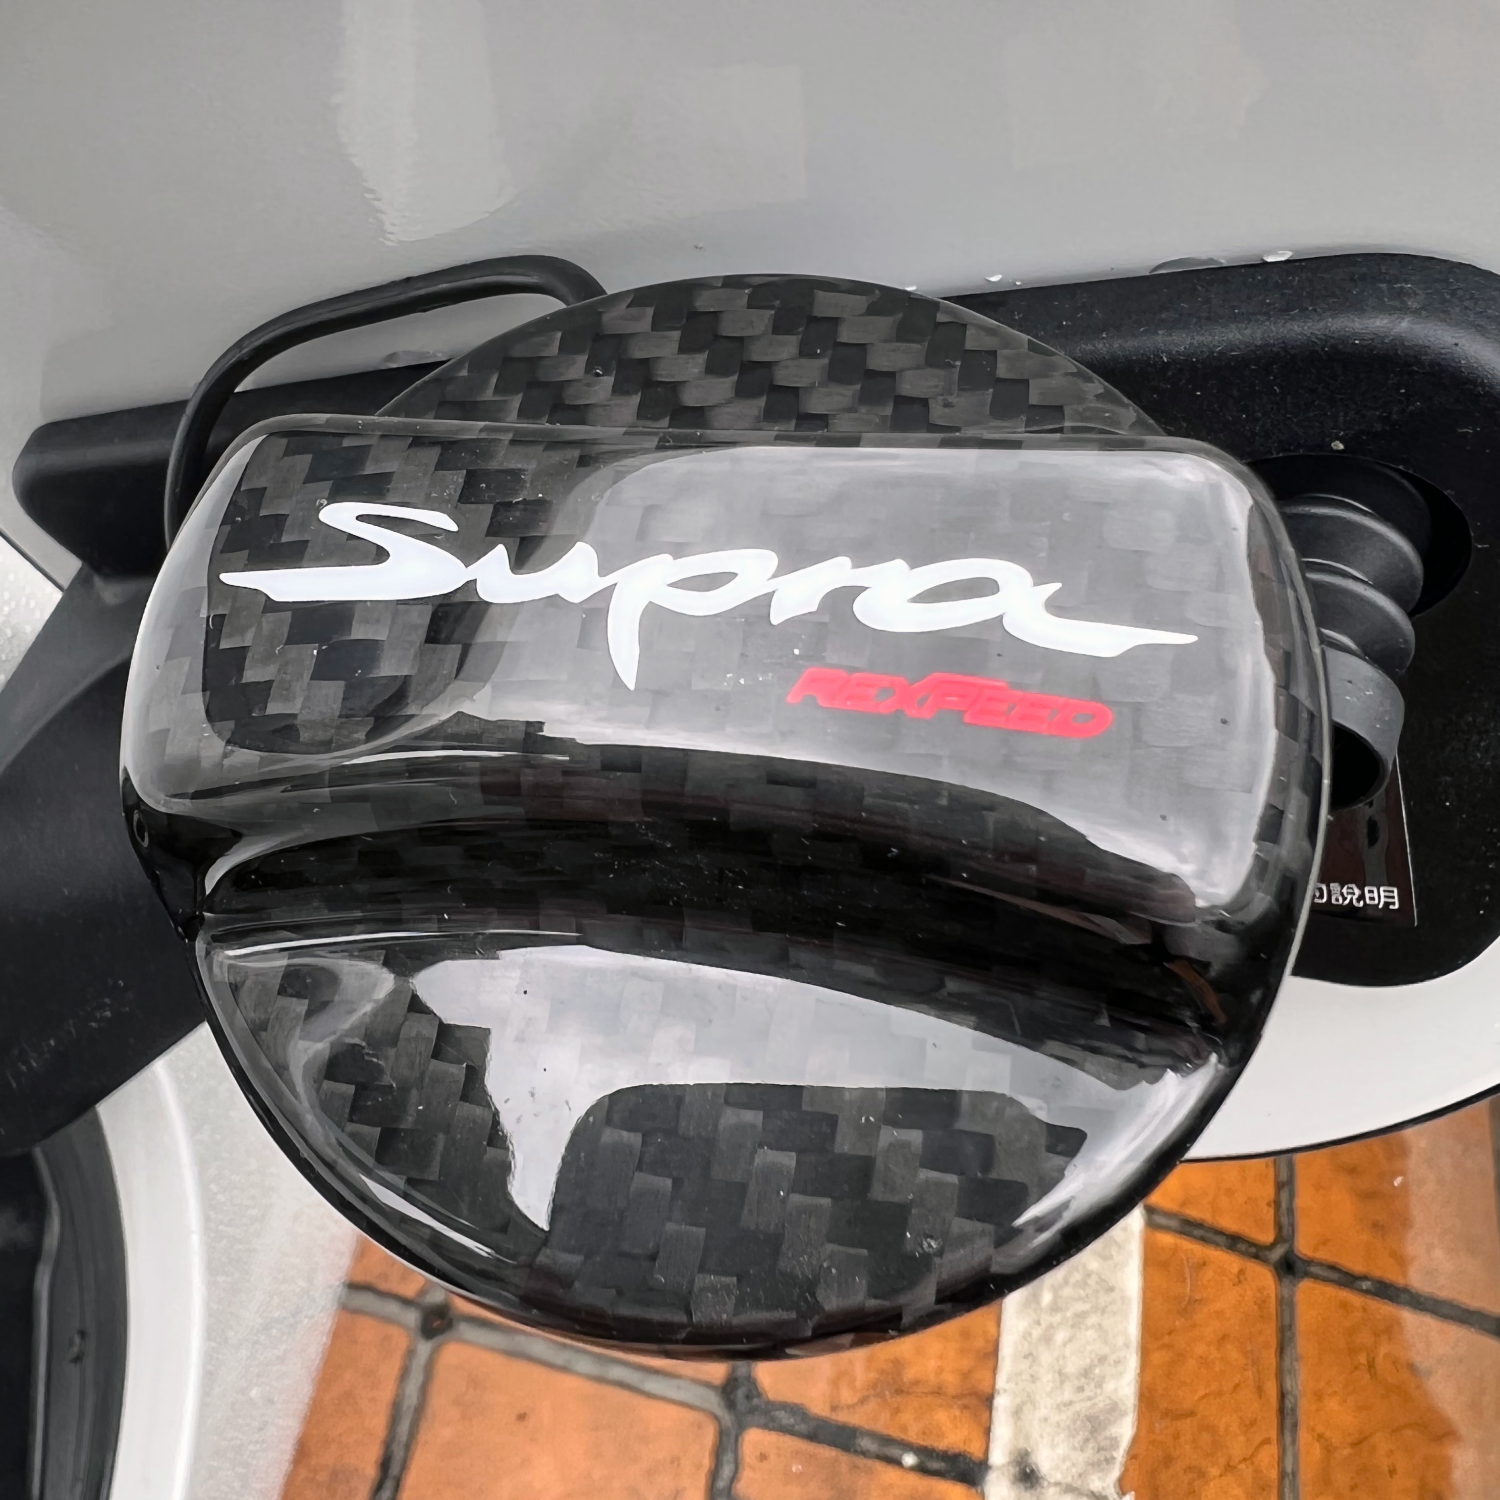 Rexpeed Dry Carbon Competition Cap Cover - Gloss / Matte (MK5 Supra)